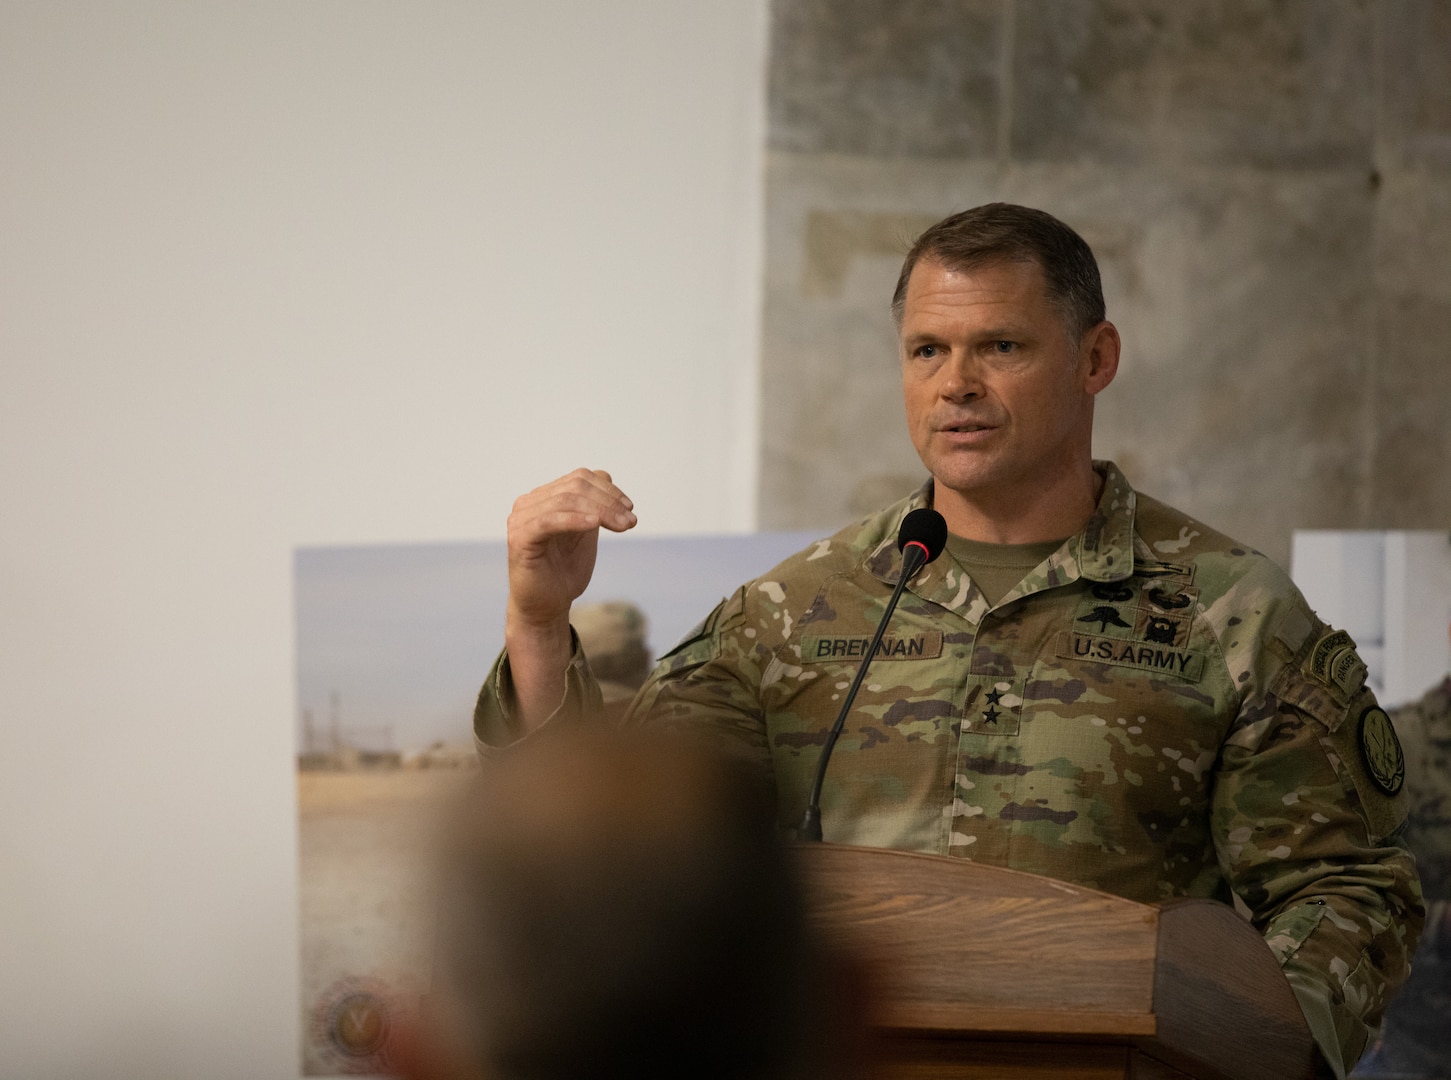 U.S. Army Maj. Gen. John W. Brennan, outgoing commander of Combined Joint Task Force - Operation Inherent Resolve, speaks during a transfer of authority ceremony at Baghdad, Iraq, Sept. 8, 2022. CJTF-OIR remains steadfast in its commitment to support partner forces in designated areas of Iraq and Syria as they secure the enduring defeat of Da’esh and prevent the group’s reemergence. (U.S Army photo by Sgt. Julio Hernandez)